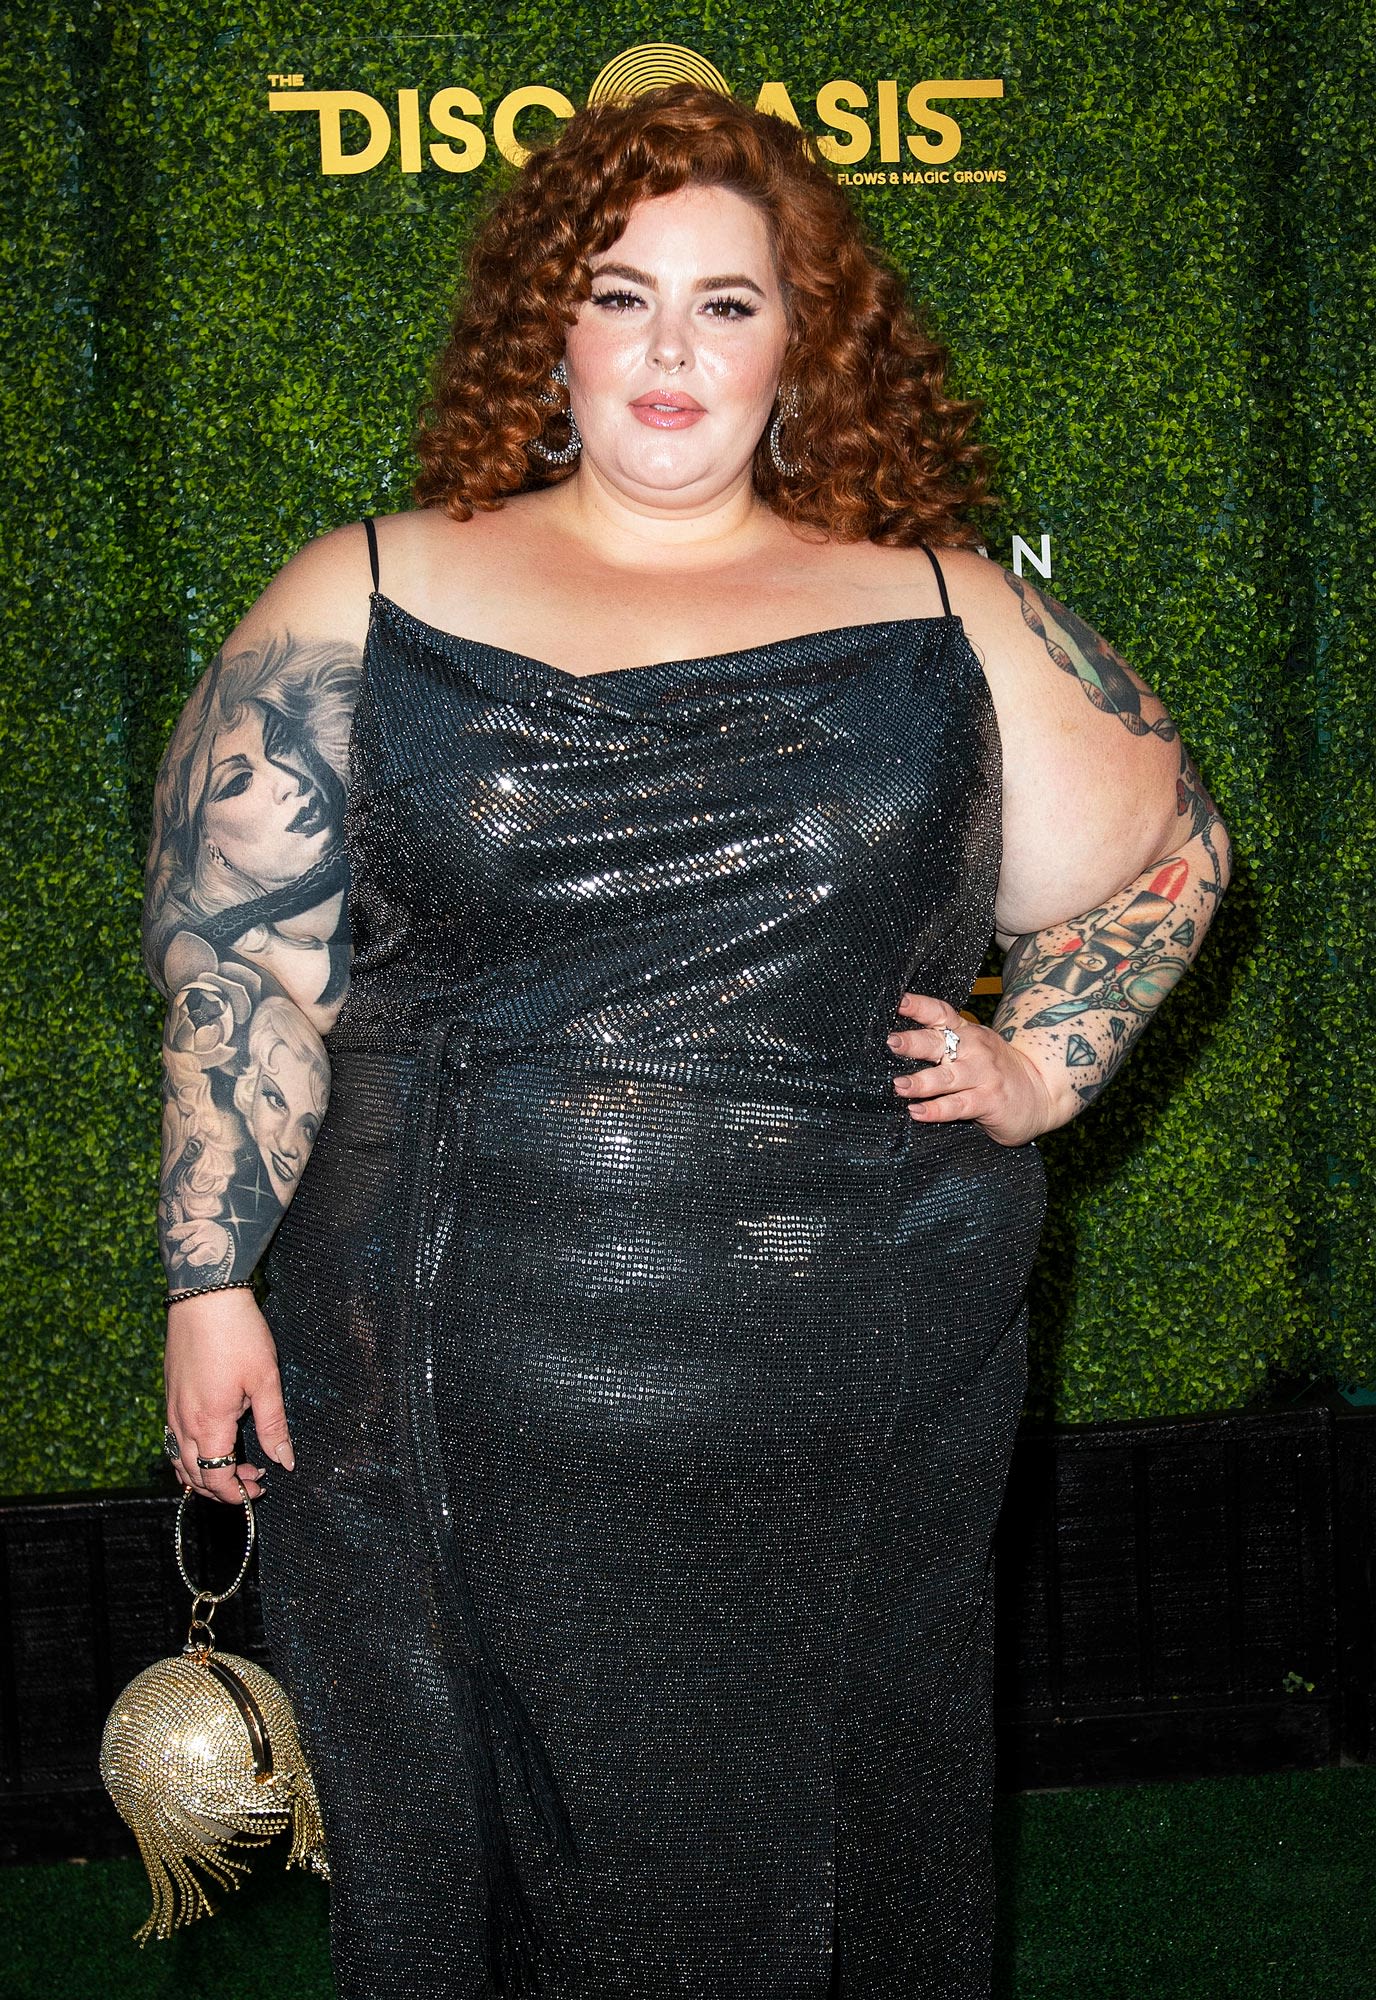 Tess Holliday Credits Medical Marijuana and Therapy for Helping Her Push Through ‘Dark’ Relationship